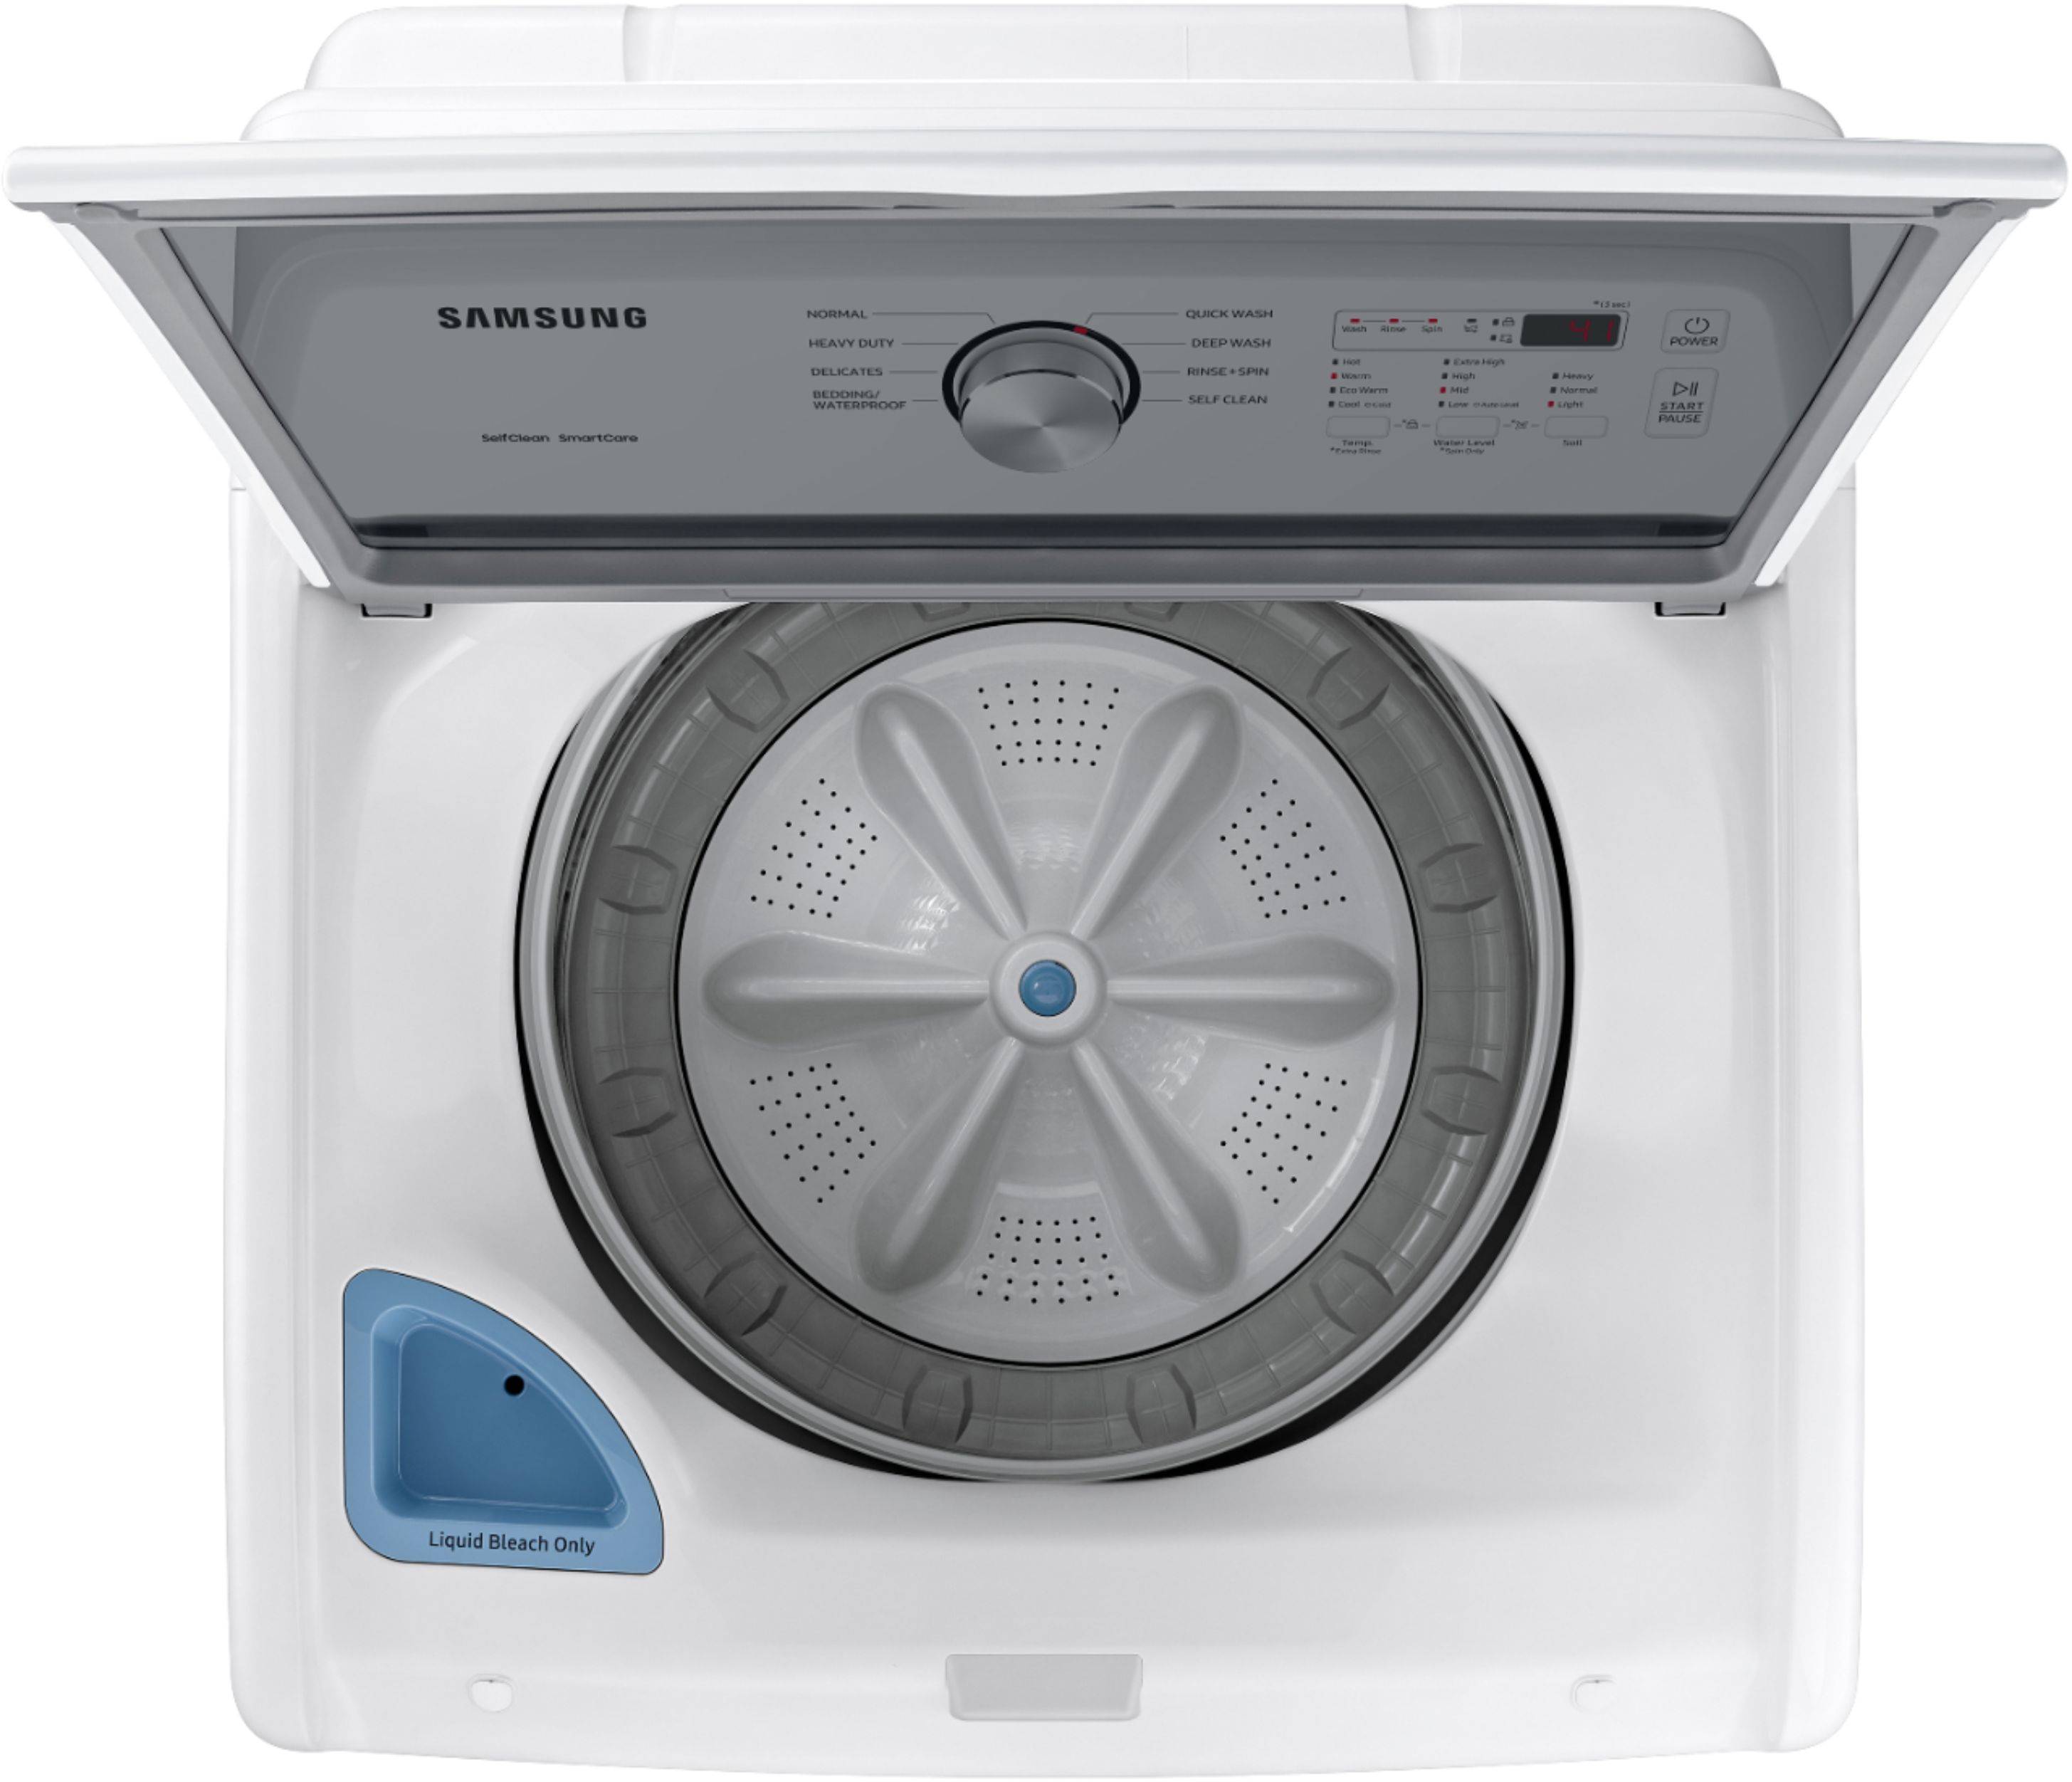 samsung-4-5-cu-ft-high-efficiency-top-load-washer-with-vibration